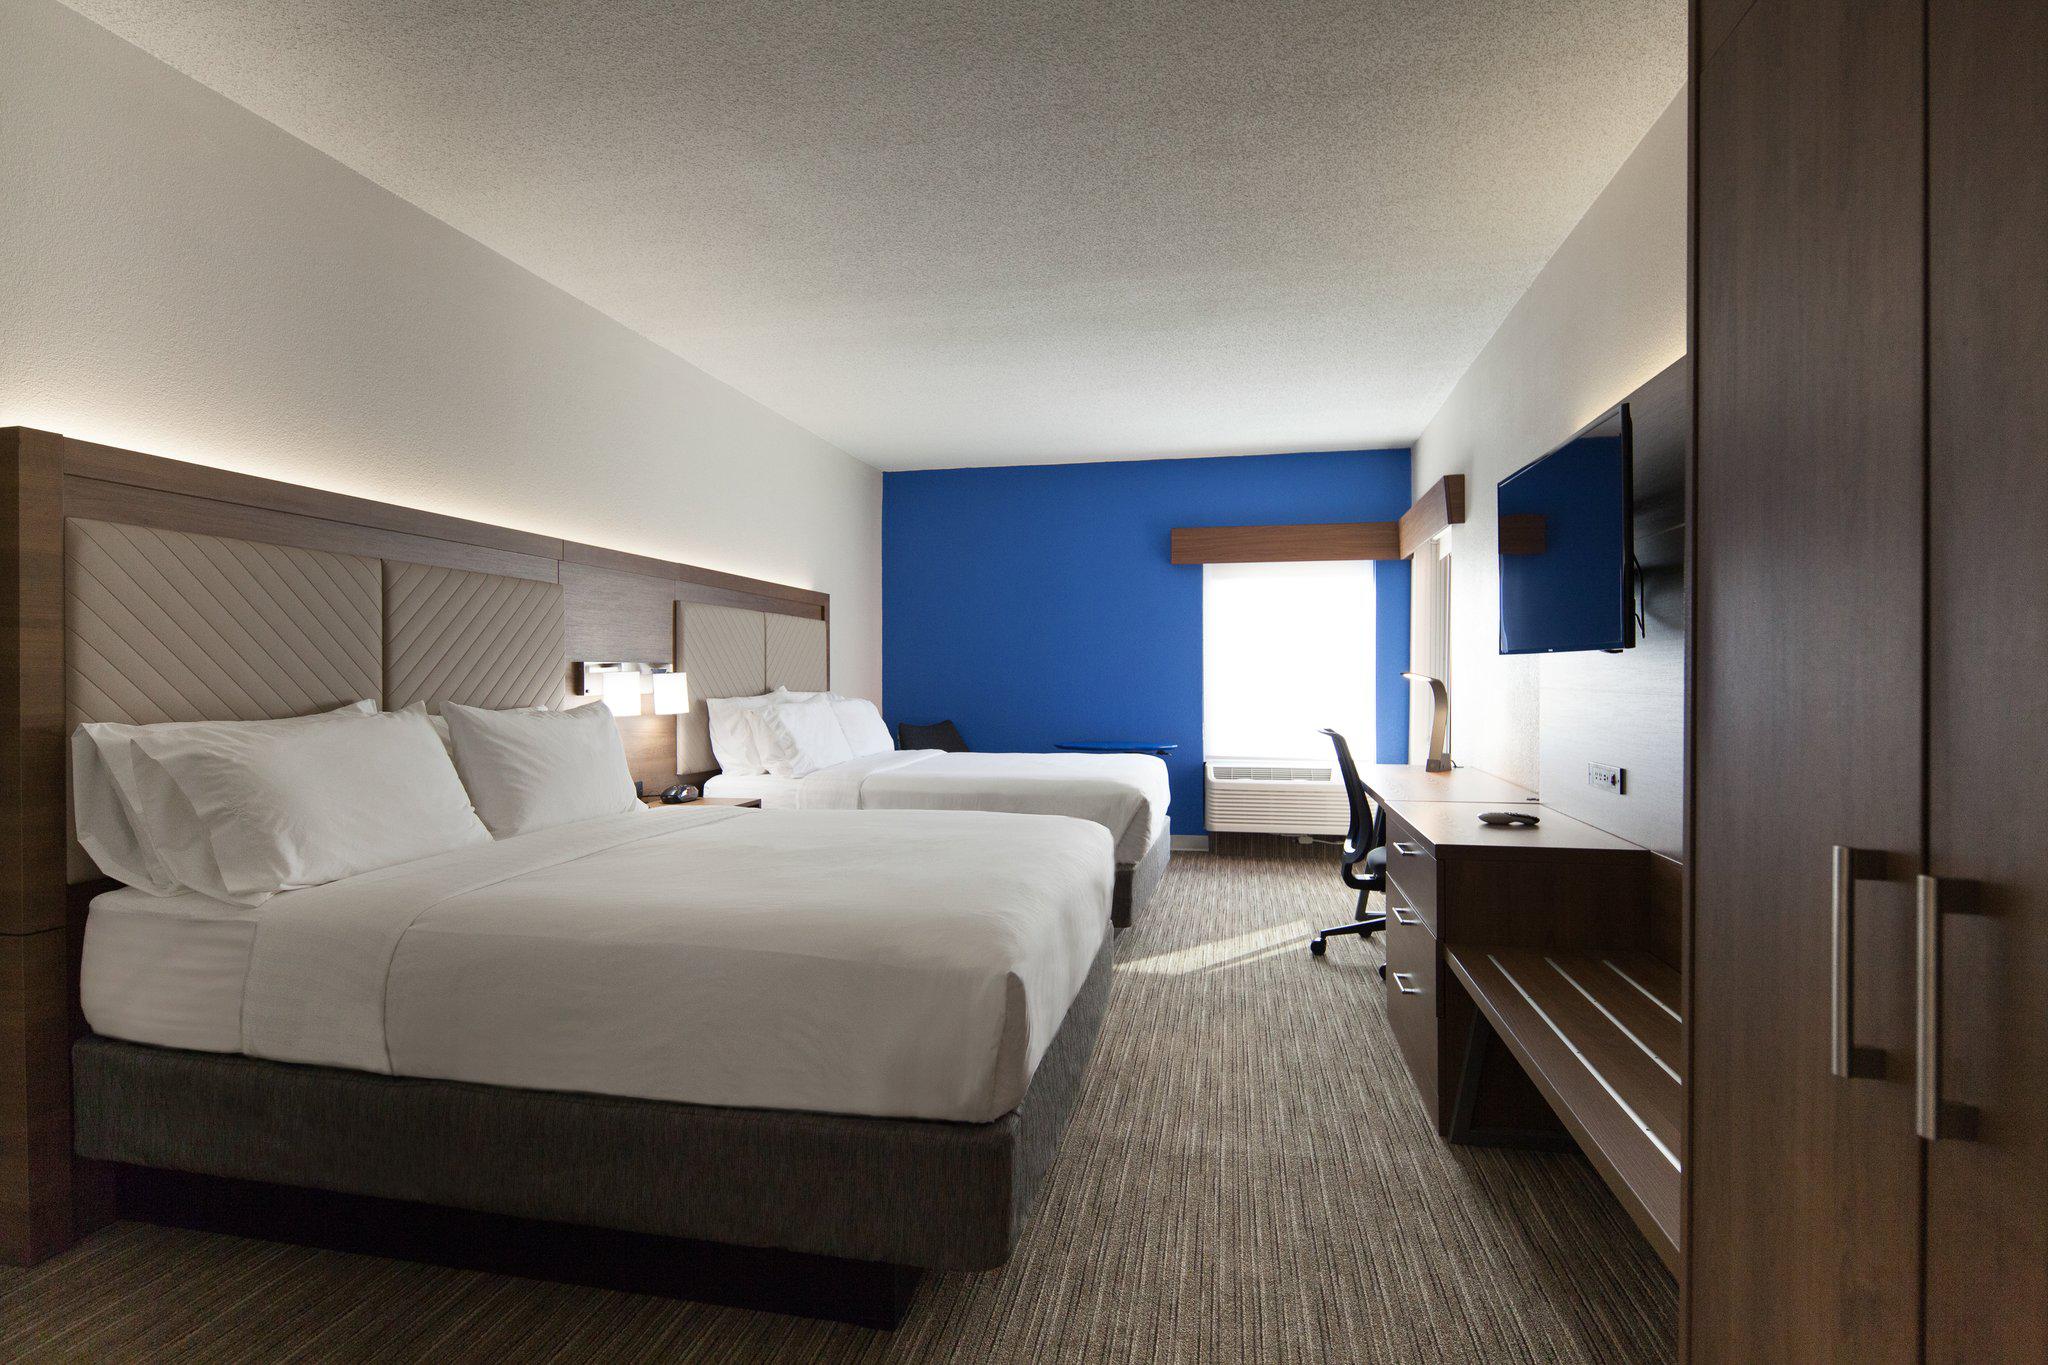 Holiday Inn Express & Suites Brentwood North-Nashville Area Photo